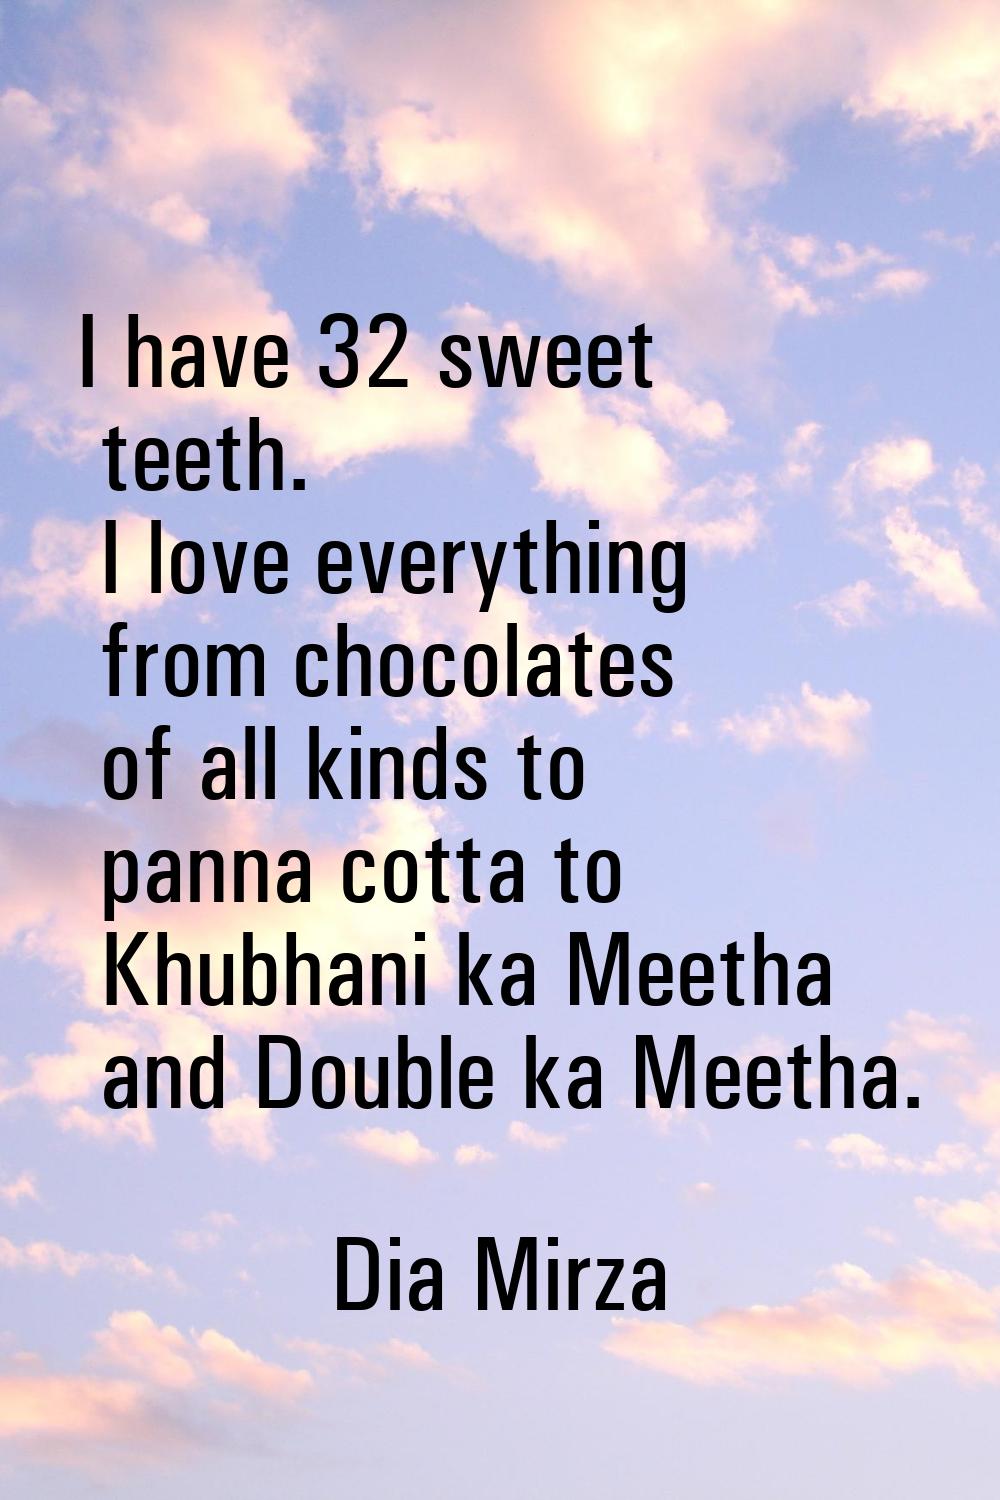 I have 32 sweet teeth. I love everything from chocolates of all kinds to panna cotta to Khubhani ka